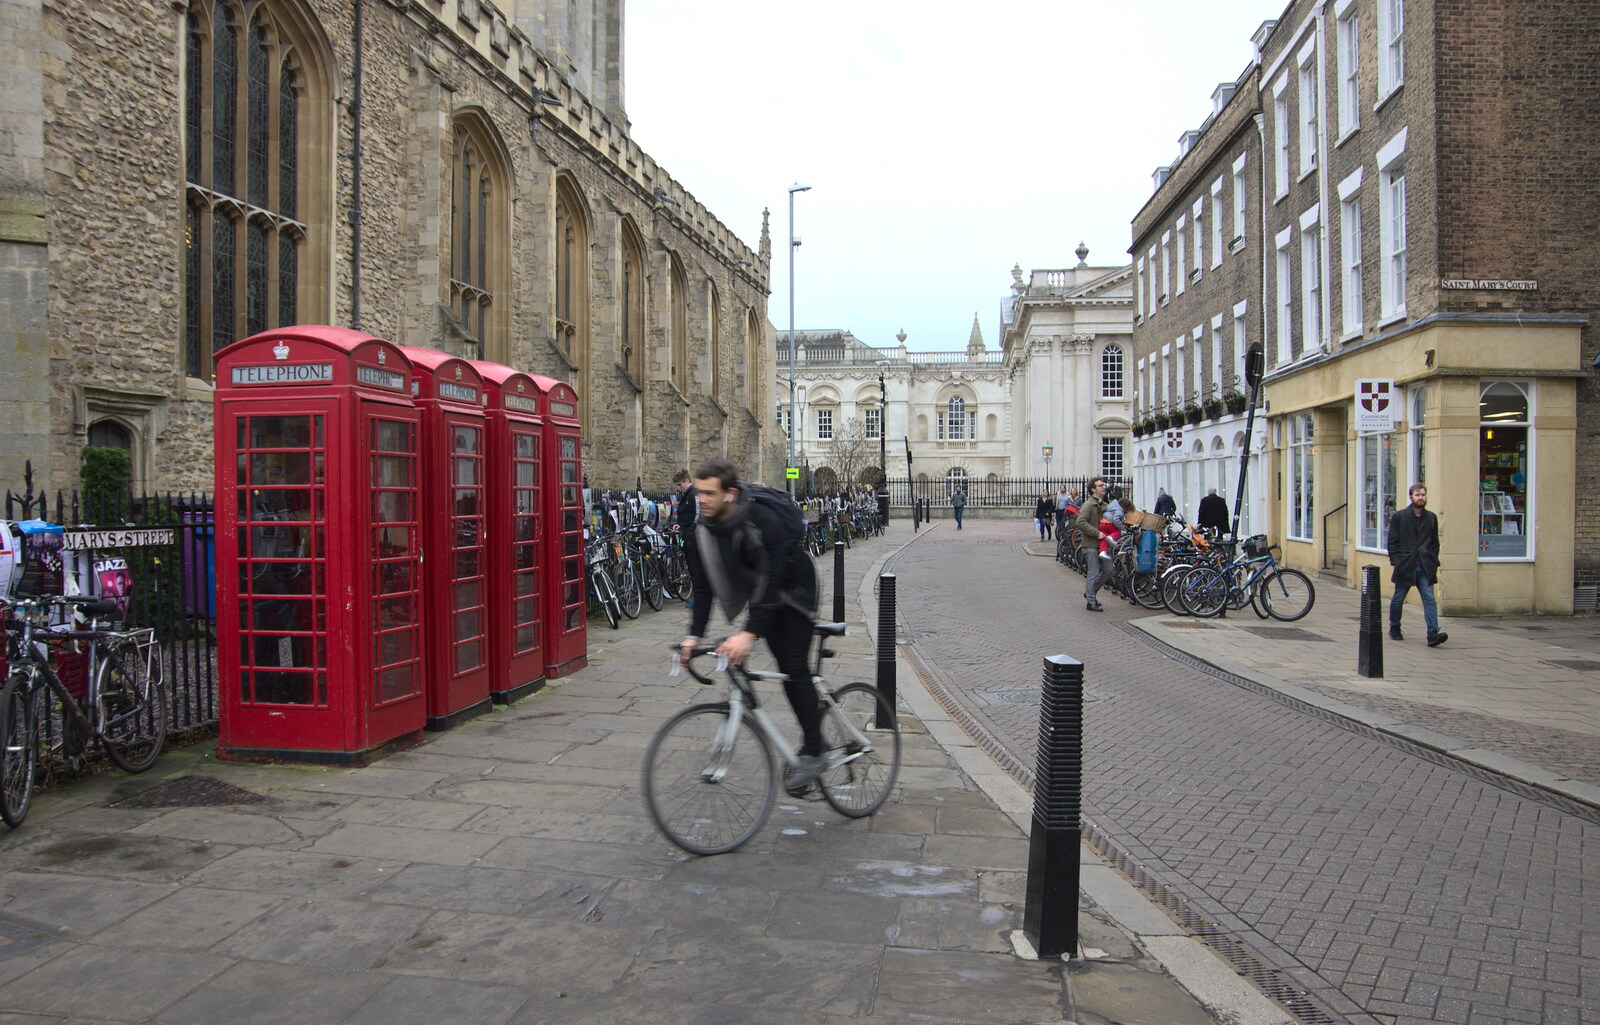 The four K6 phoneboxes and a bit of Great St. Mary from The SwiftKey Reunion Brunch, Regent Street, Cambridge - 12th January 2019